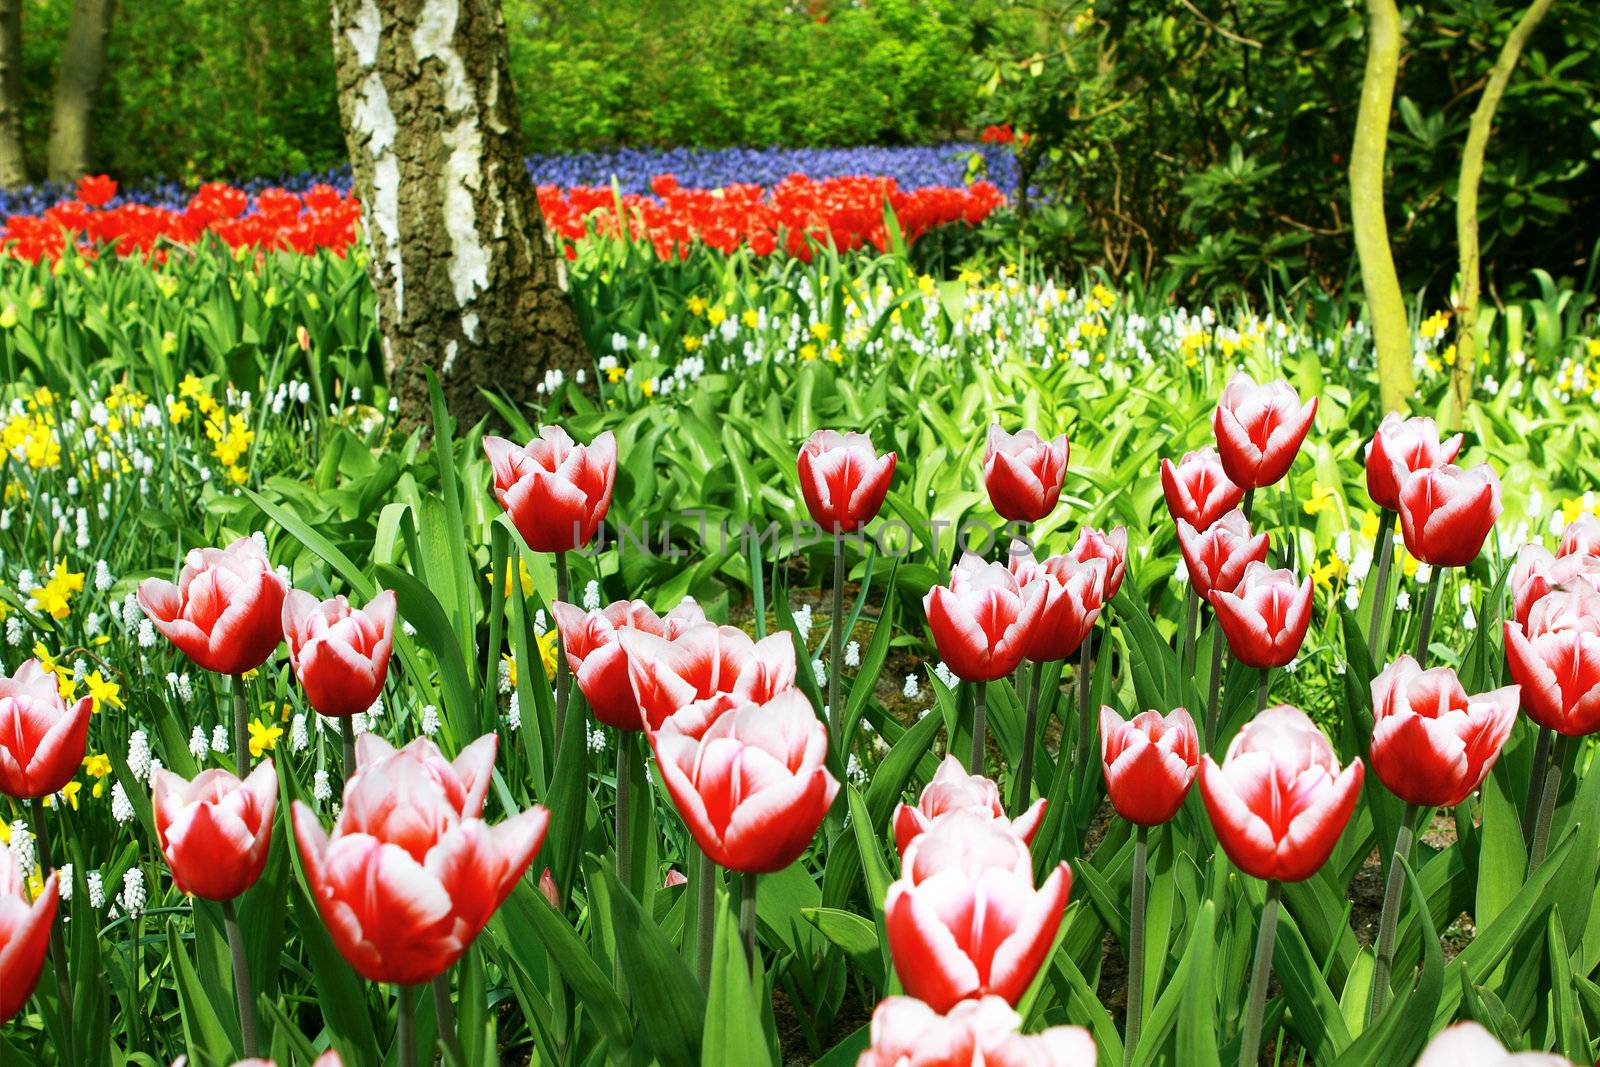 many colorful tulips blossoming in the spring garden